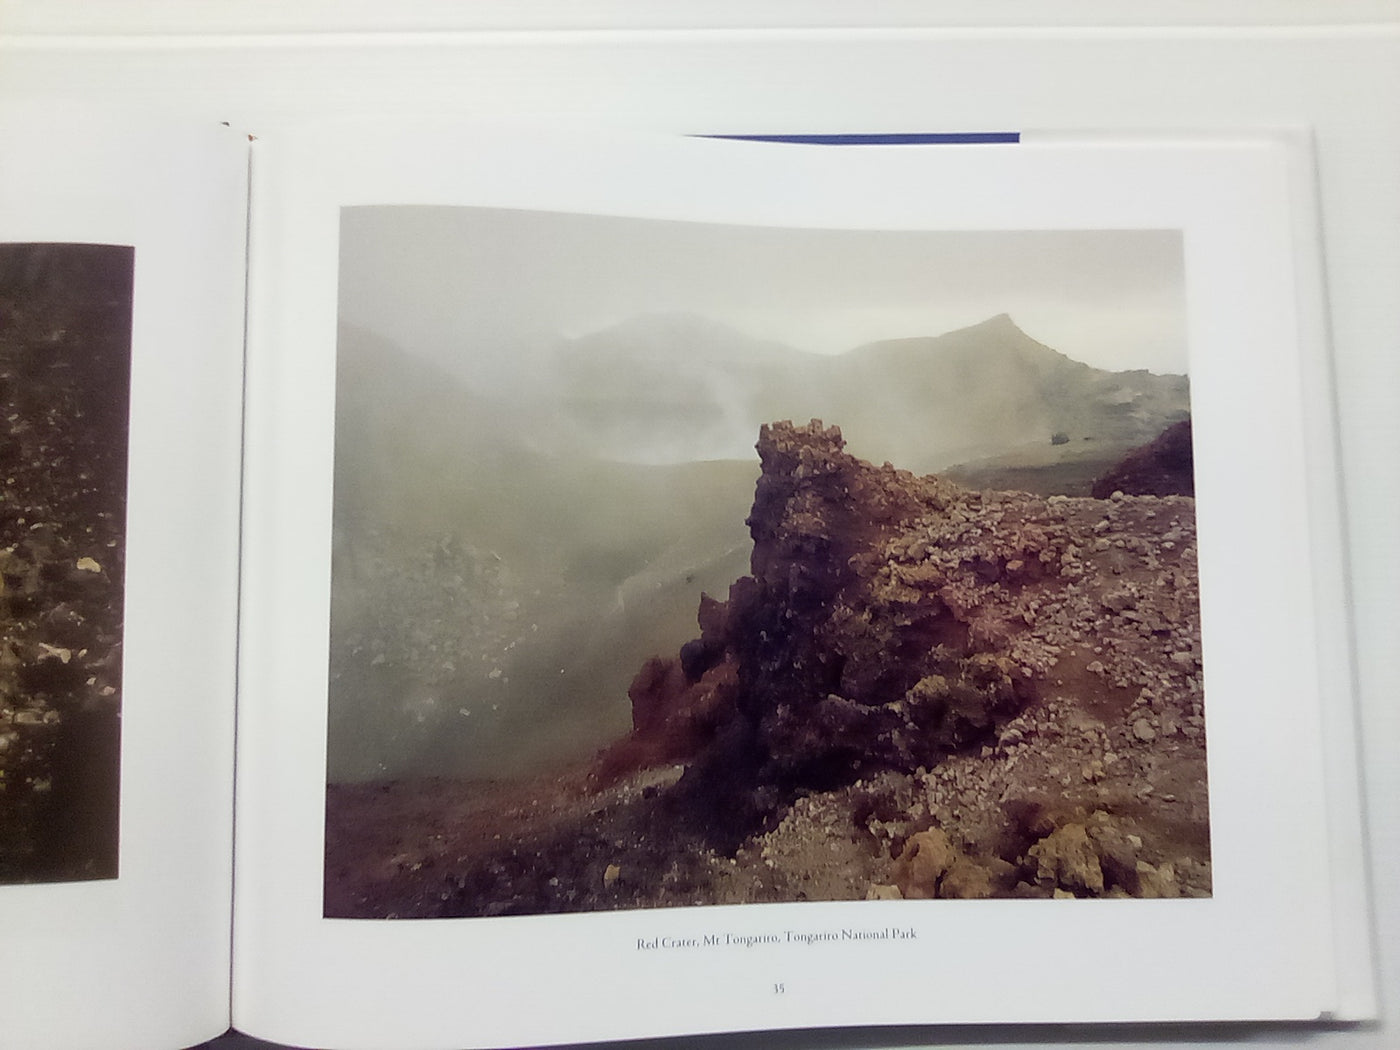 Moment and Memory - Photography in the NZ Landscape by Craig Potton